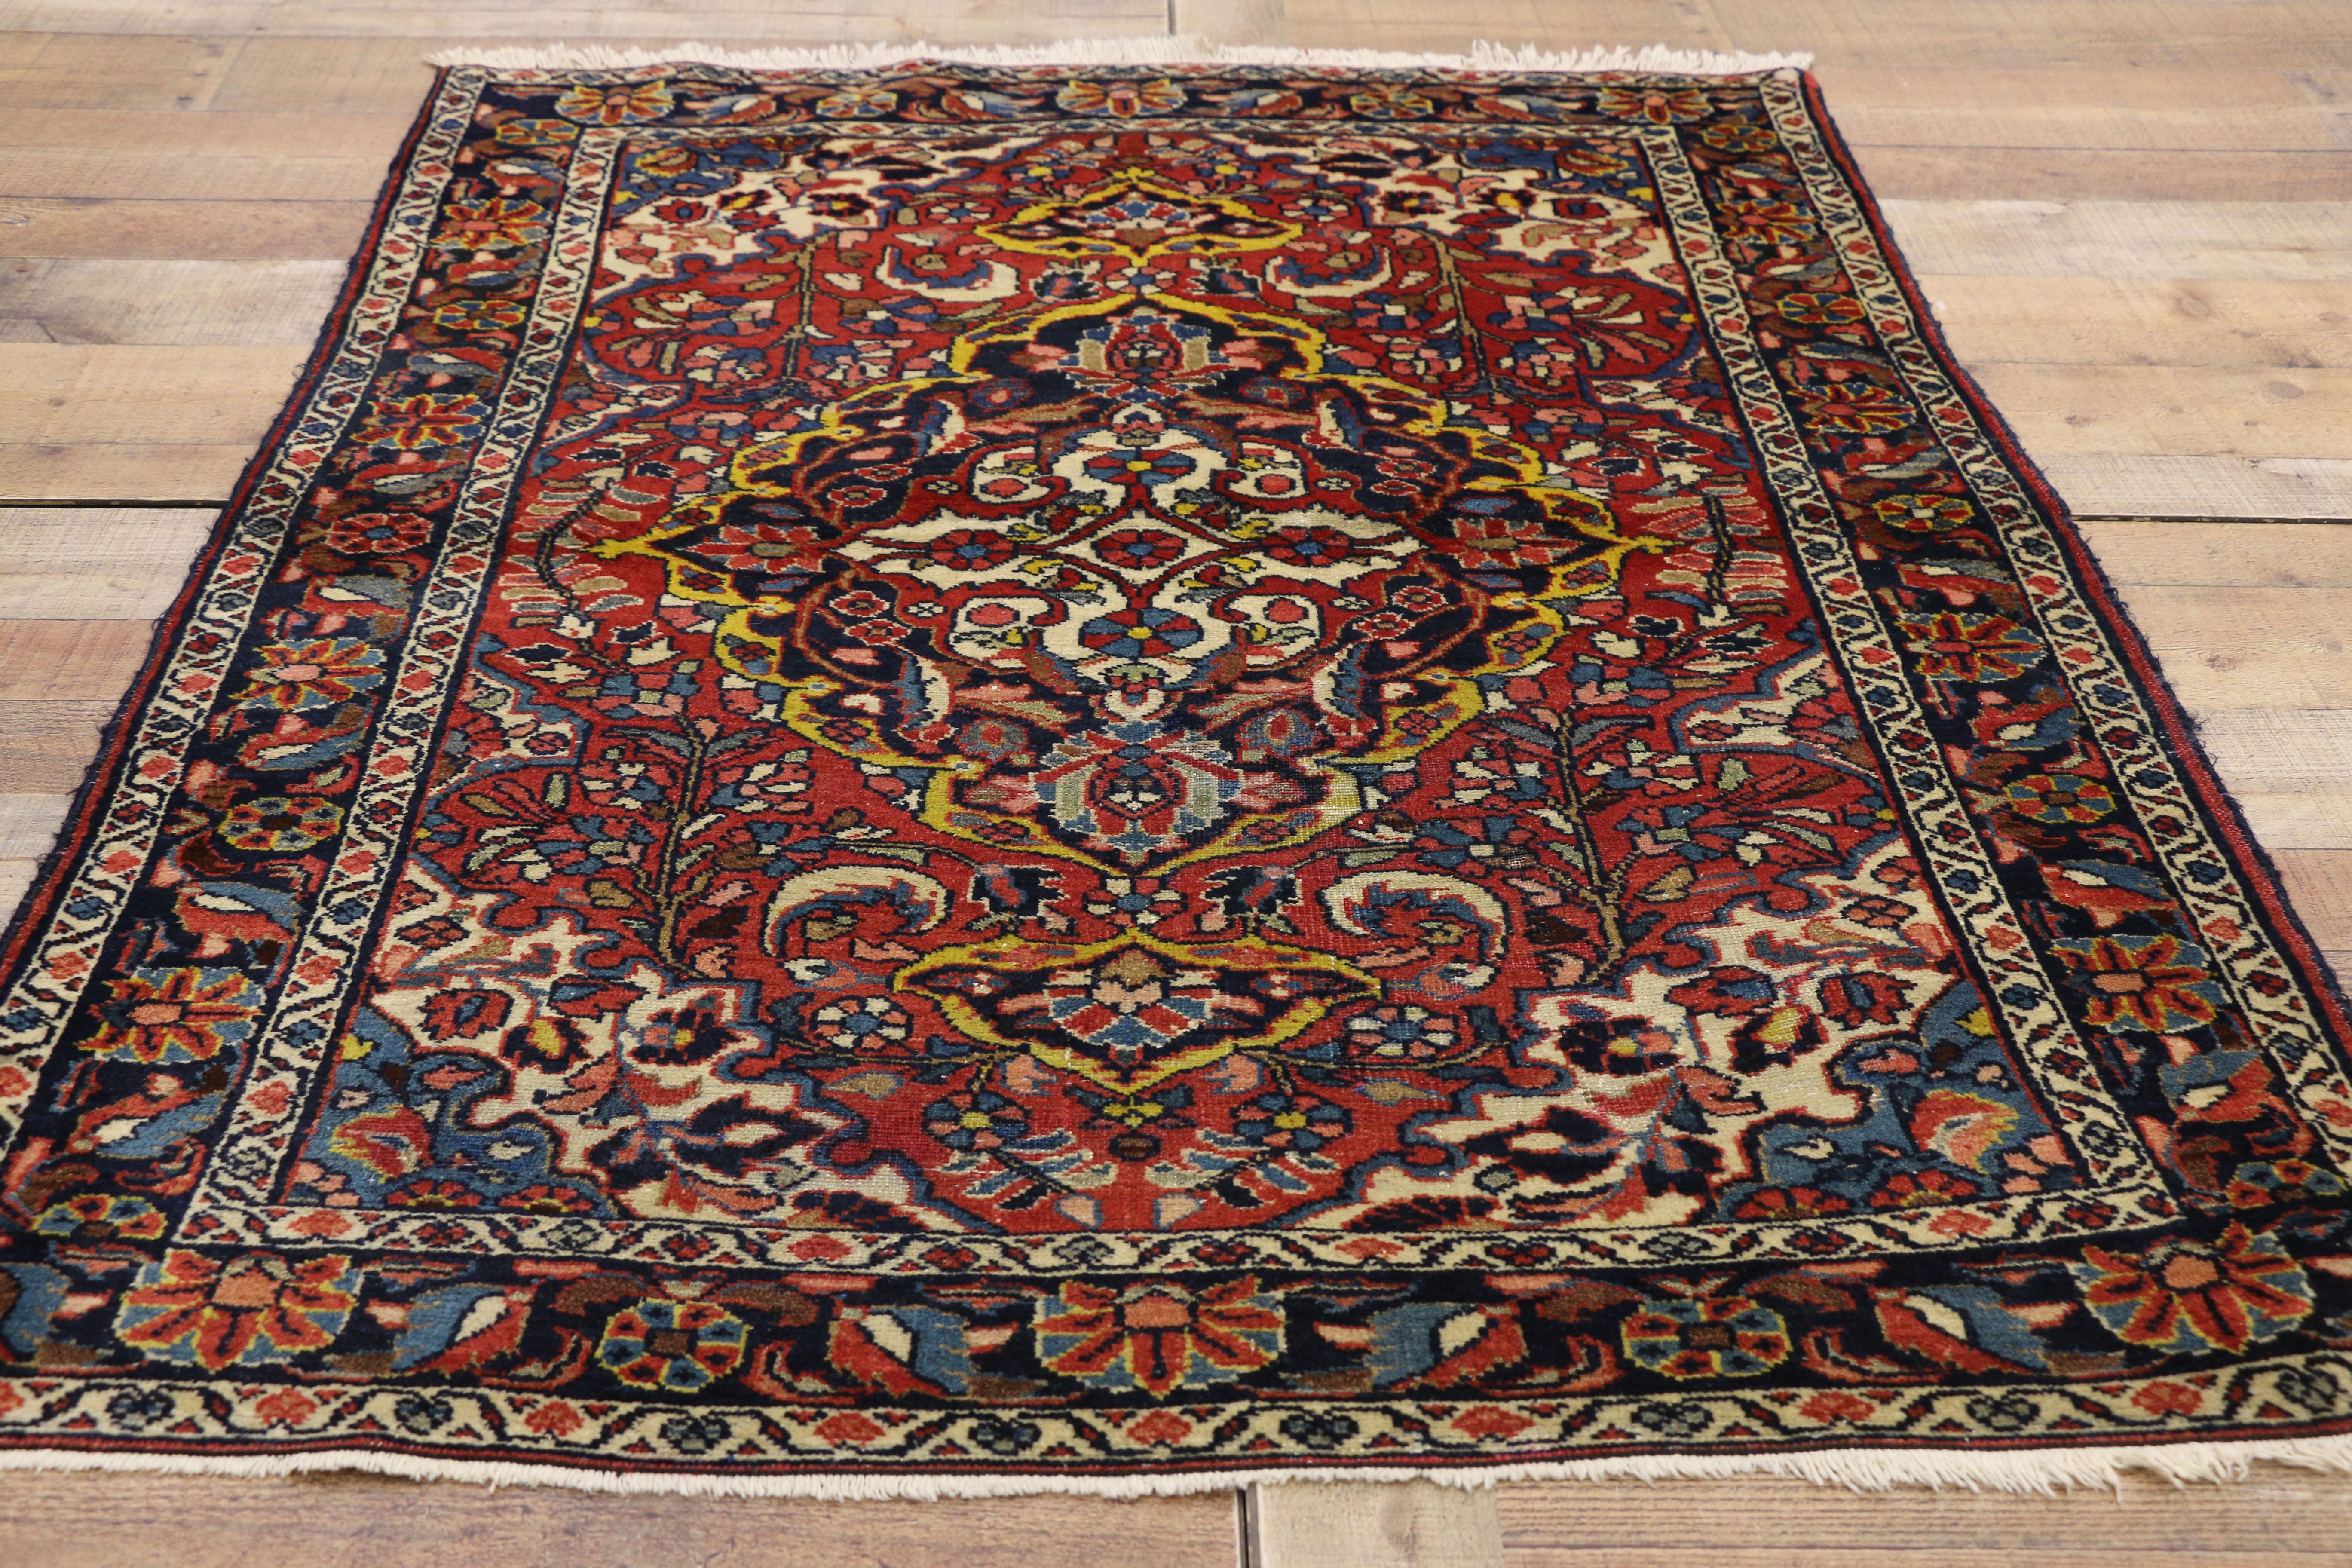 20th Century Antique Persian Lilihan Rug with Central Floral Bouquet Medallion  For Sale